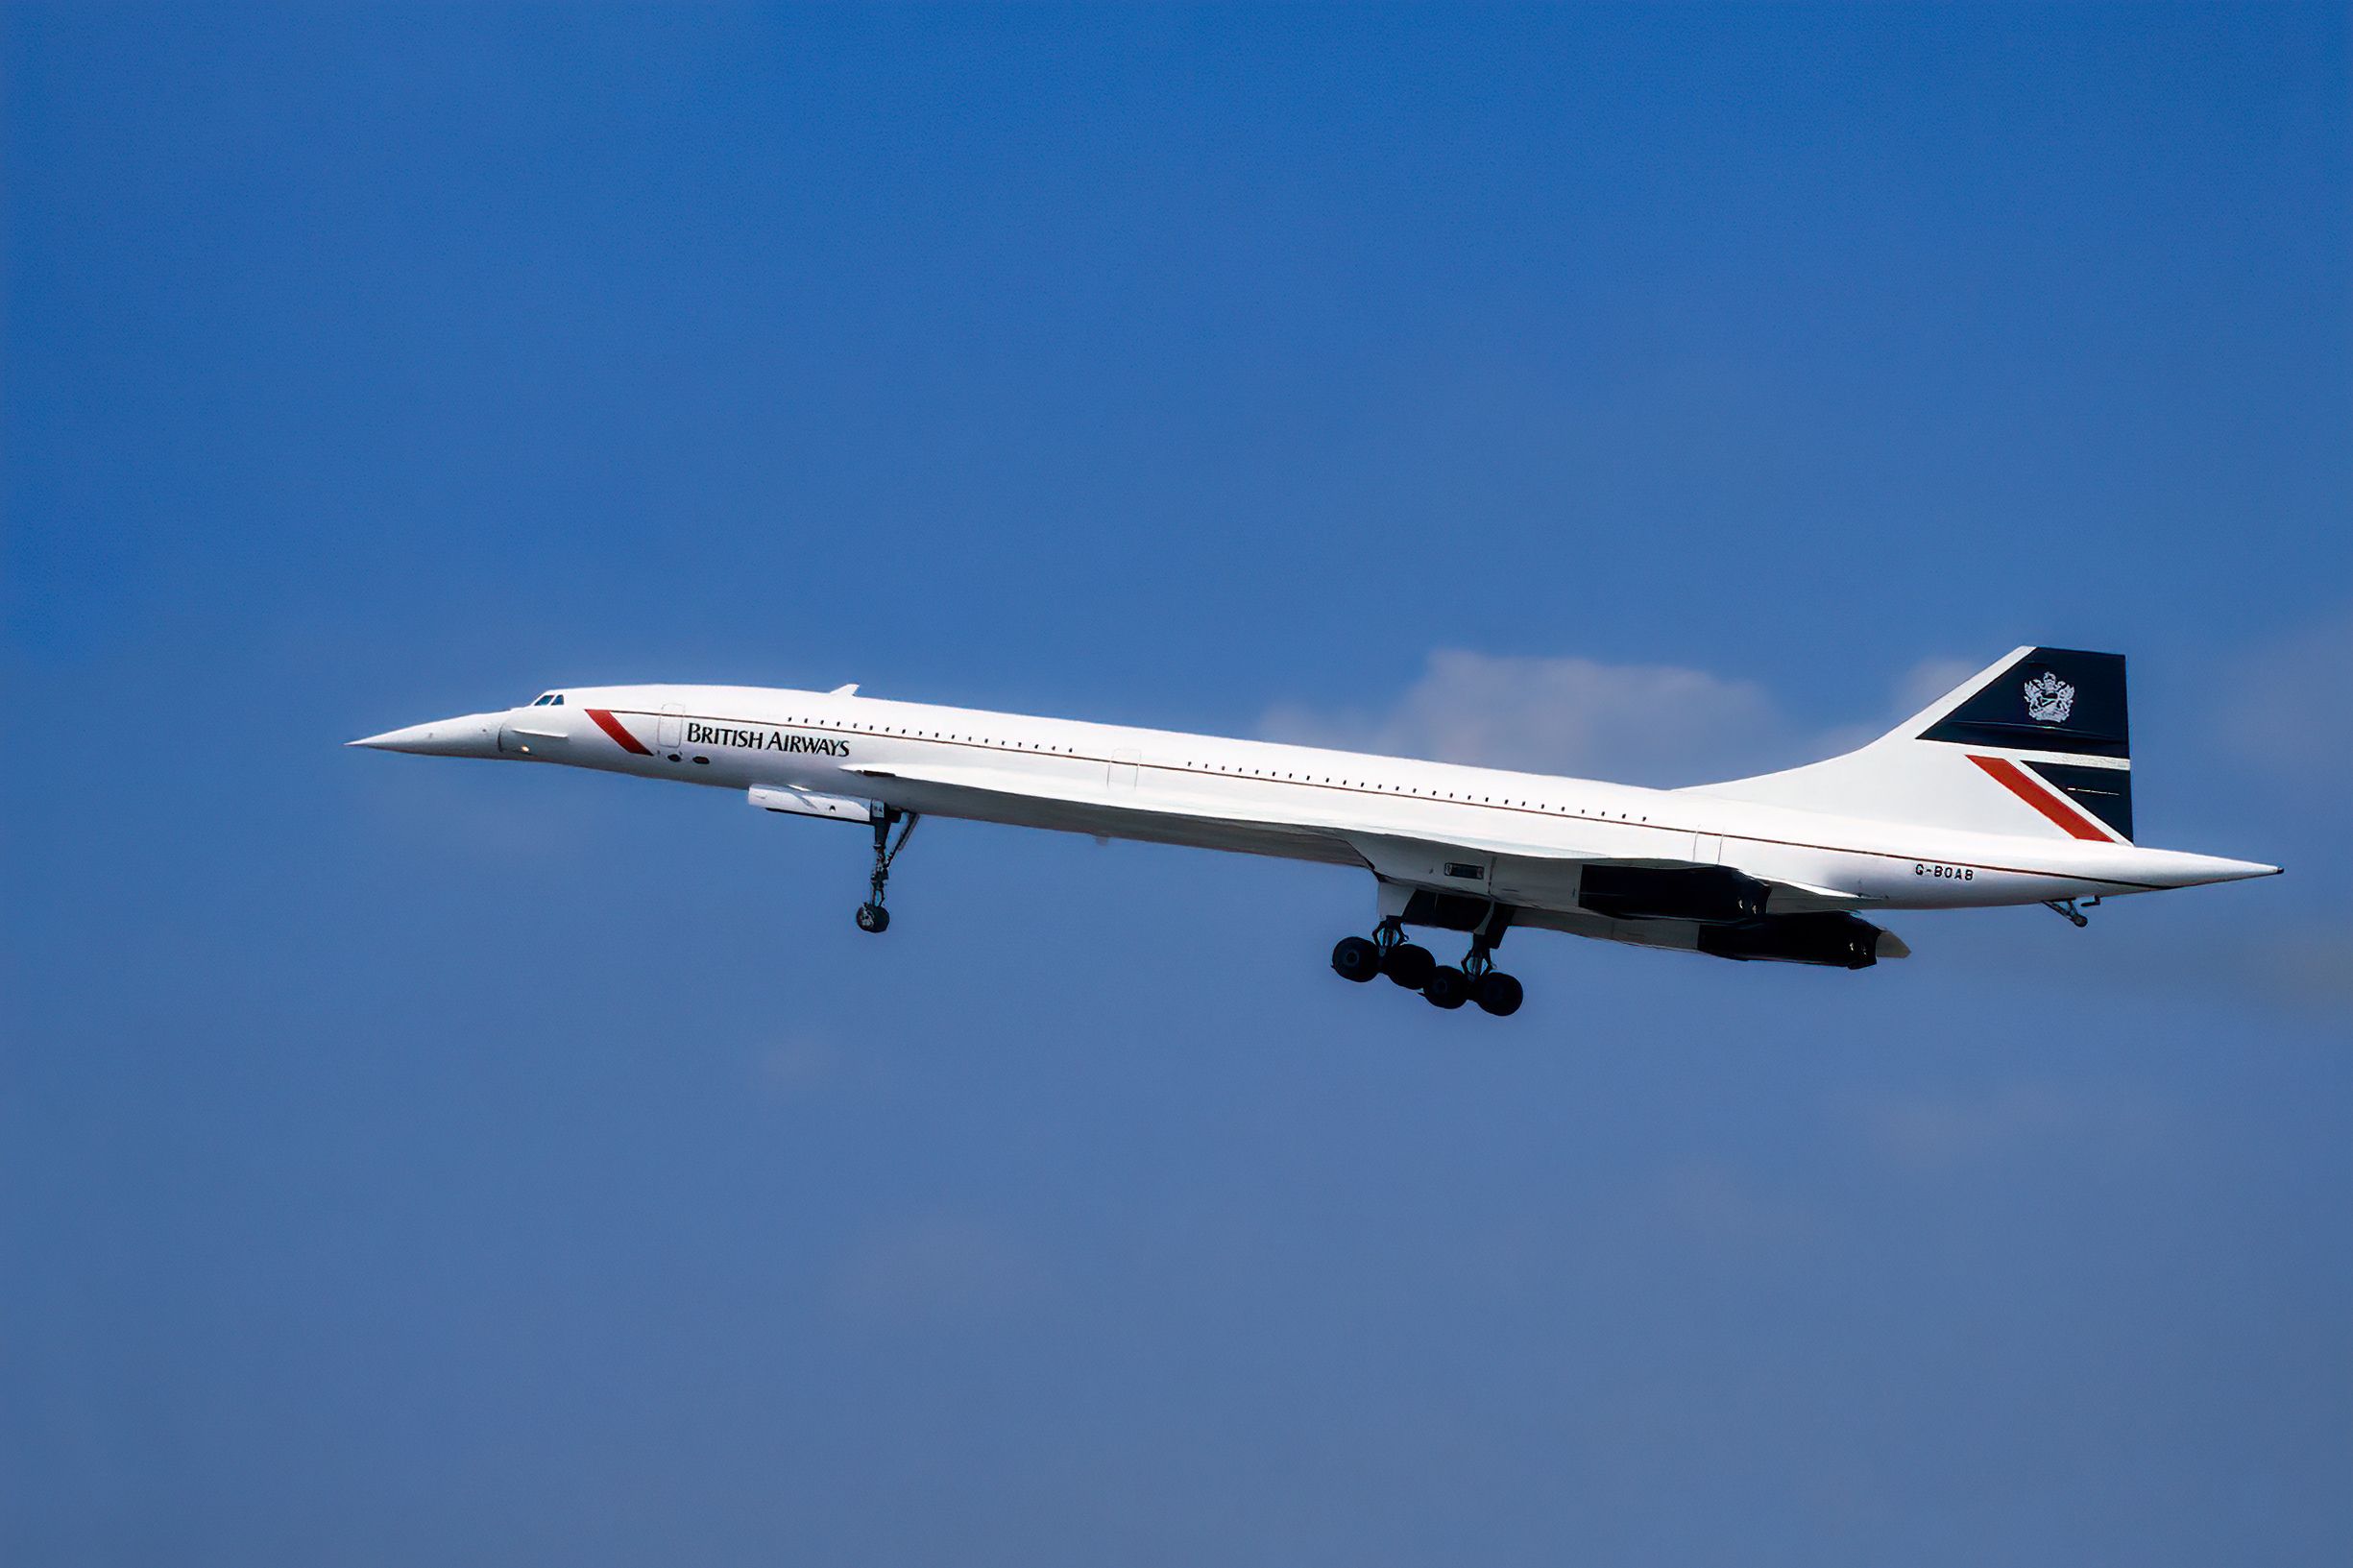 A British Airways Concorde taking off with landing gear still extended 